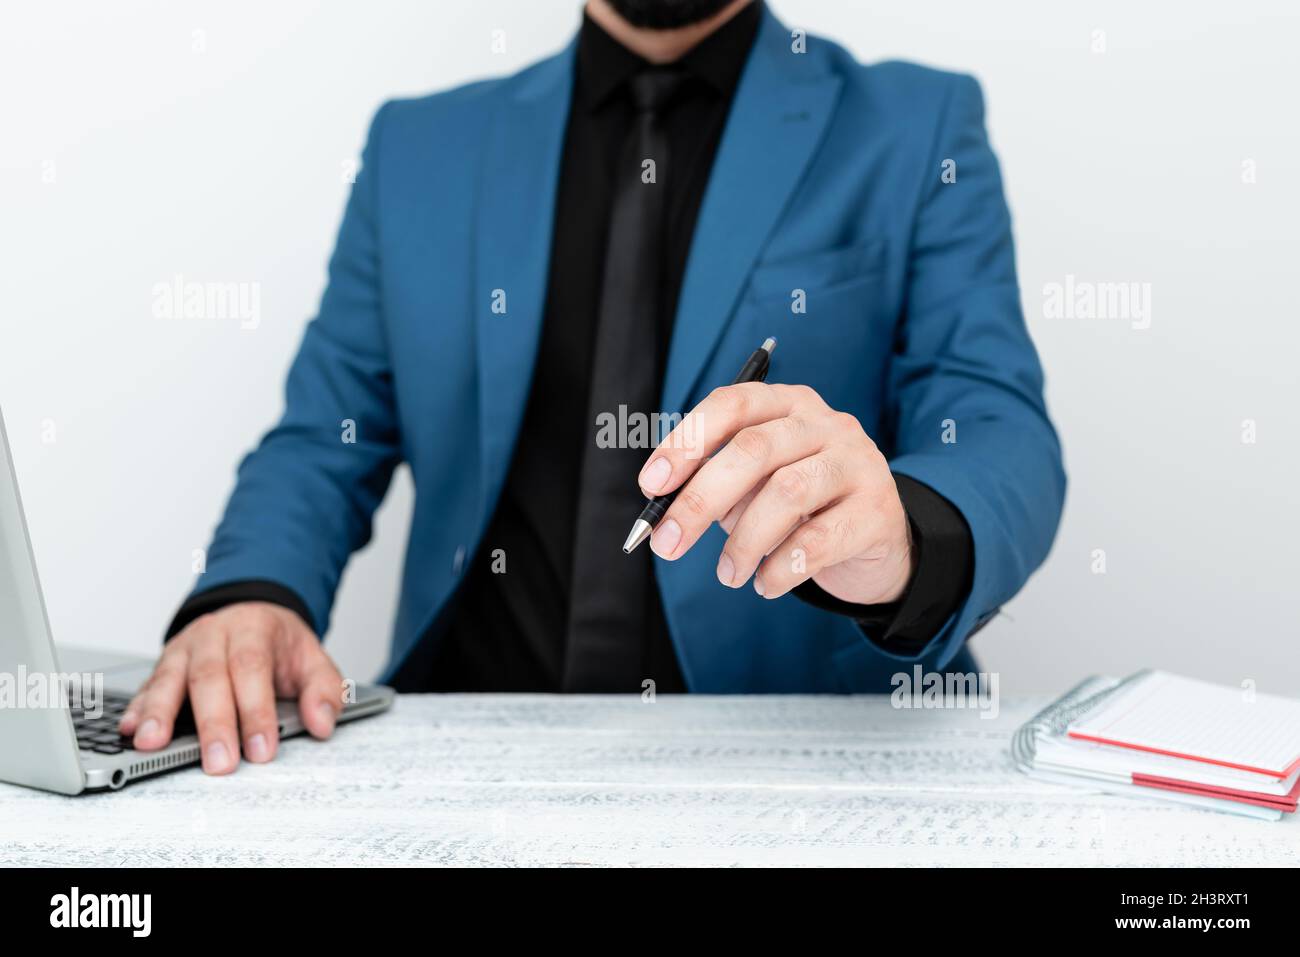 Remote Office Work Online Presenting Business Plan Designs Discussing Important Idea Job Interview Ideas Global Connectivity Com Stock Photo